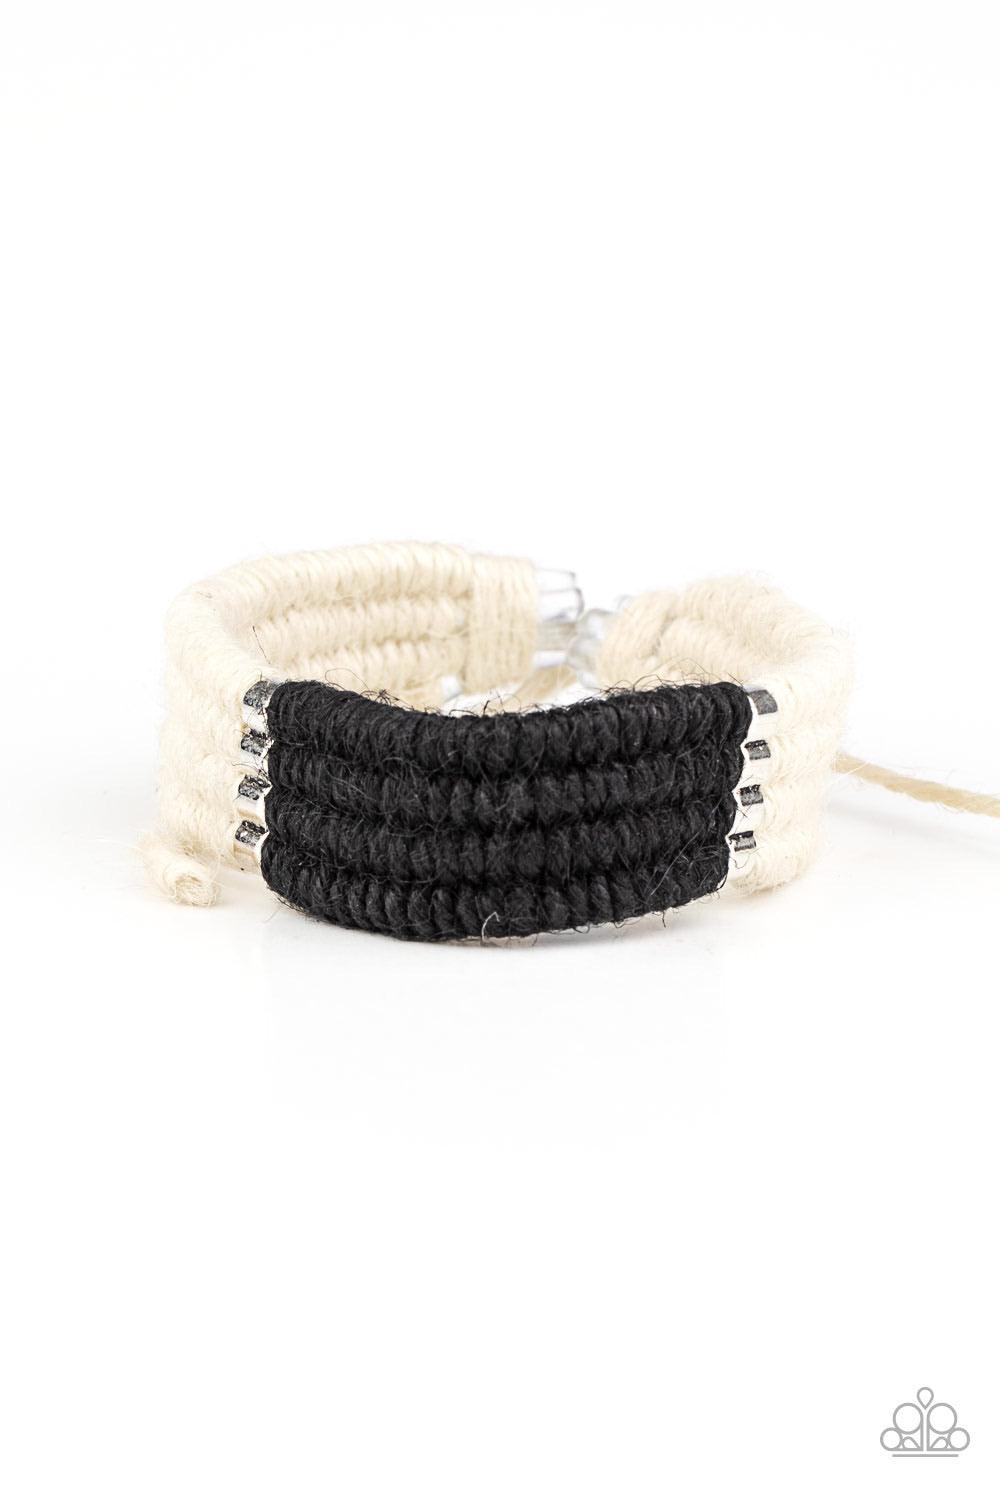 Paparazzi Accessories Hot Cross BUNGEE - Black Infused with metallic frames, rows of white and black twine-like cording knot into an earthy display around the wrist. Features an adjustable sliding knot closure. Sold as one individual bracelet. Bracelet